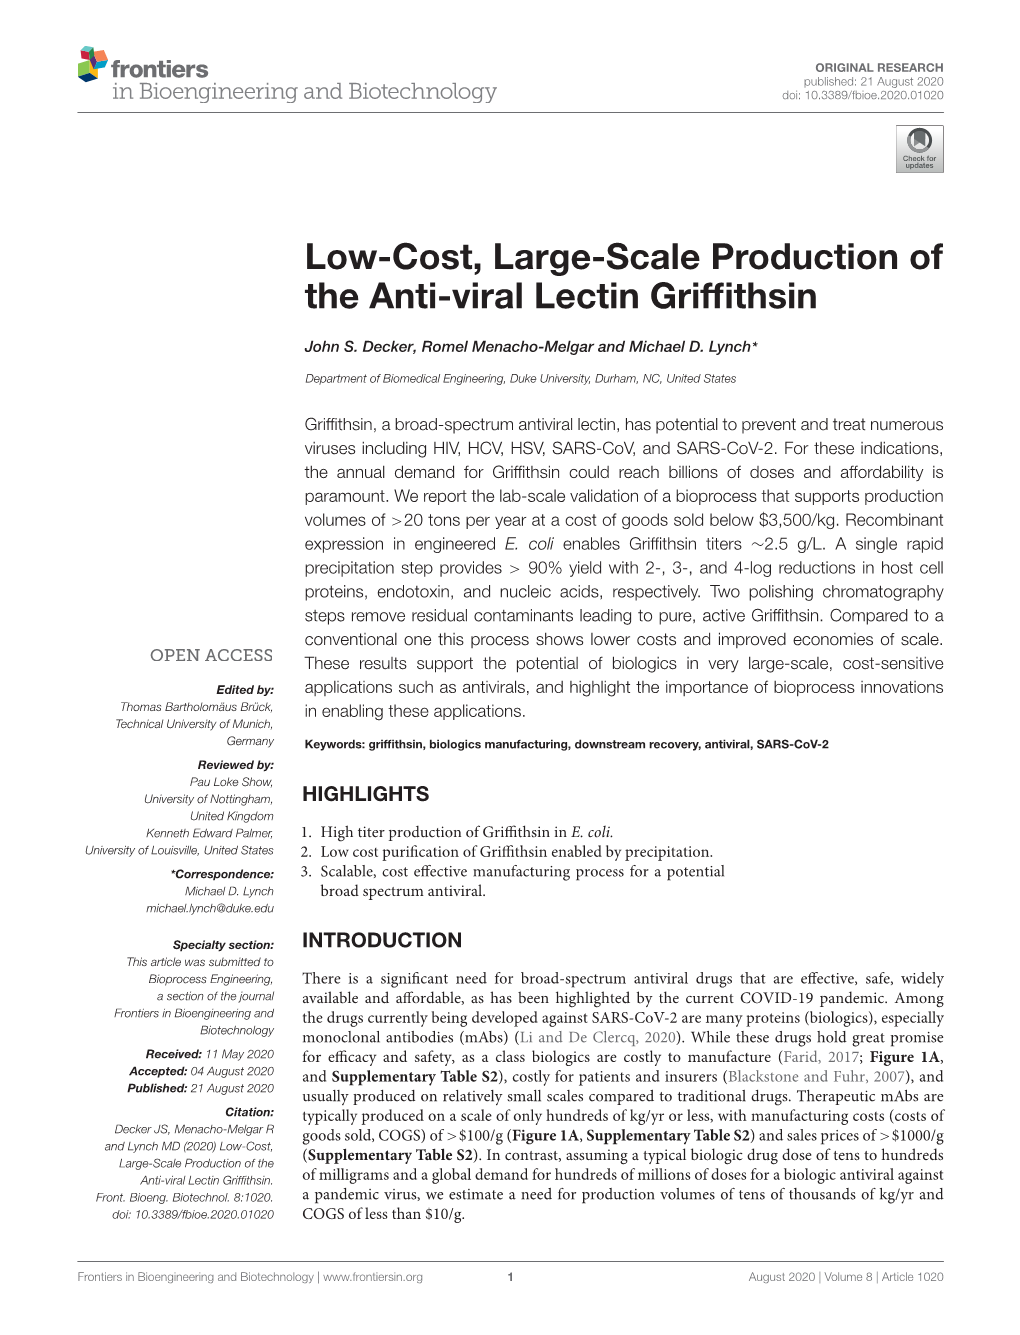 Low-Cost, Large-Scale Production of the Anti-Viral Lectin Griffithsin